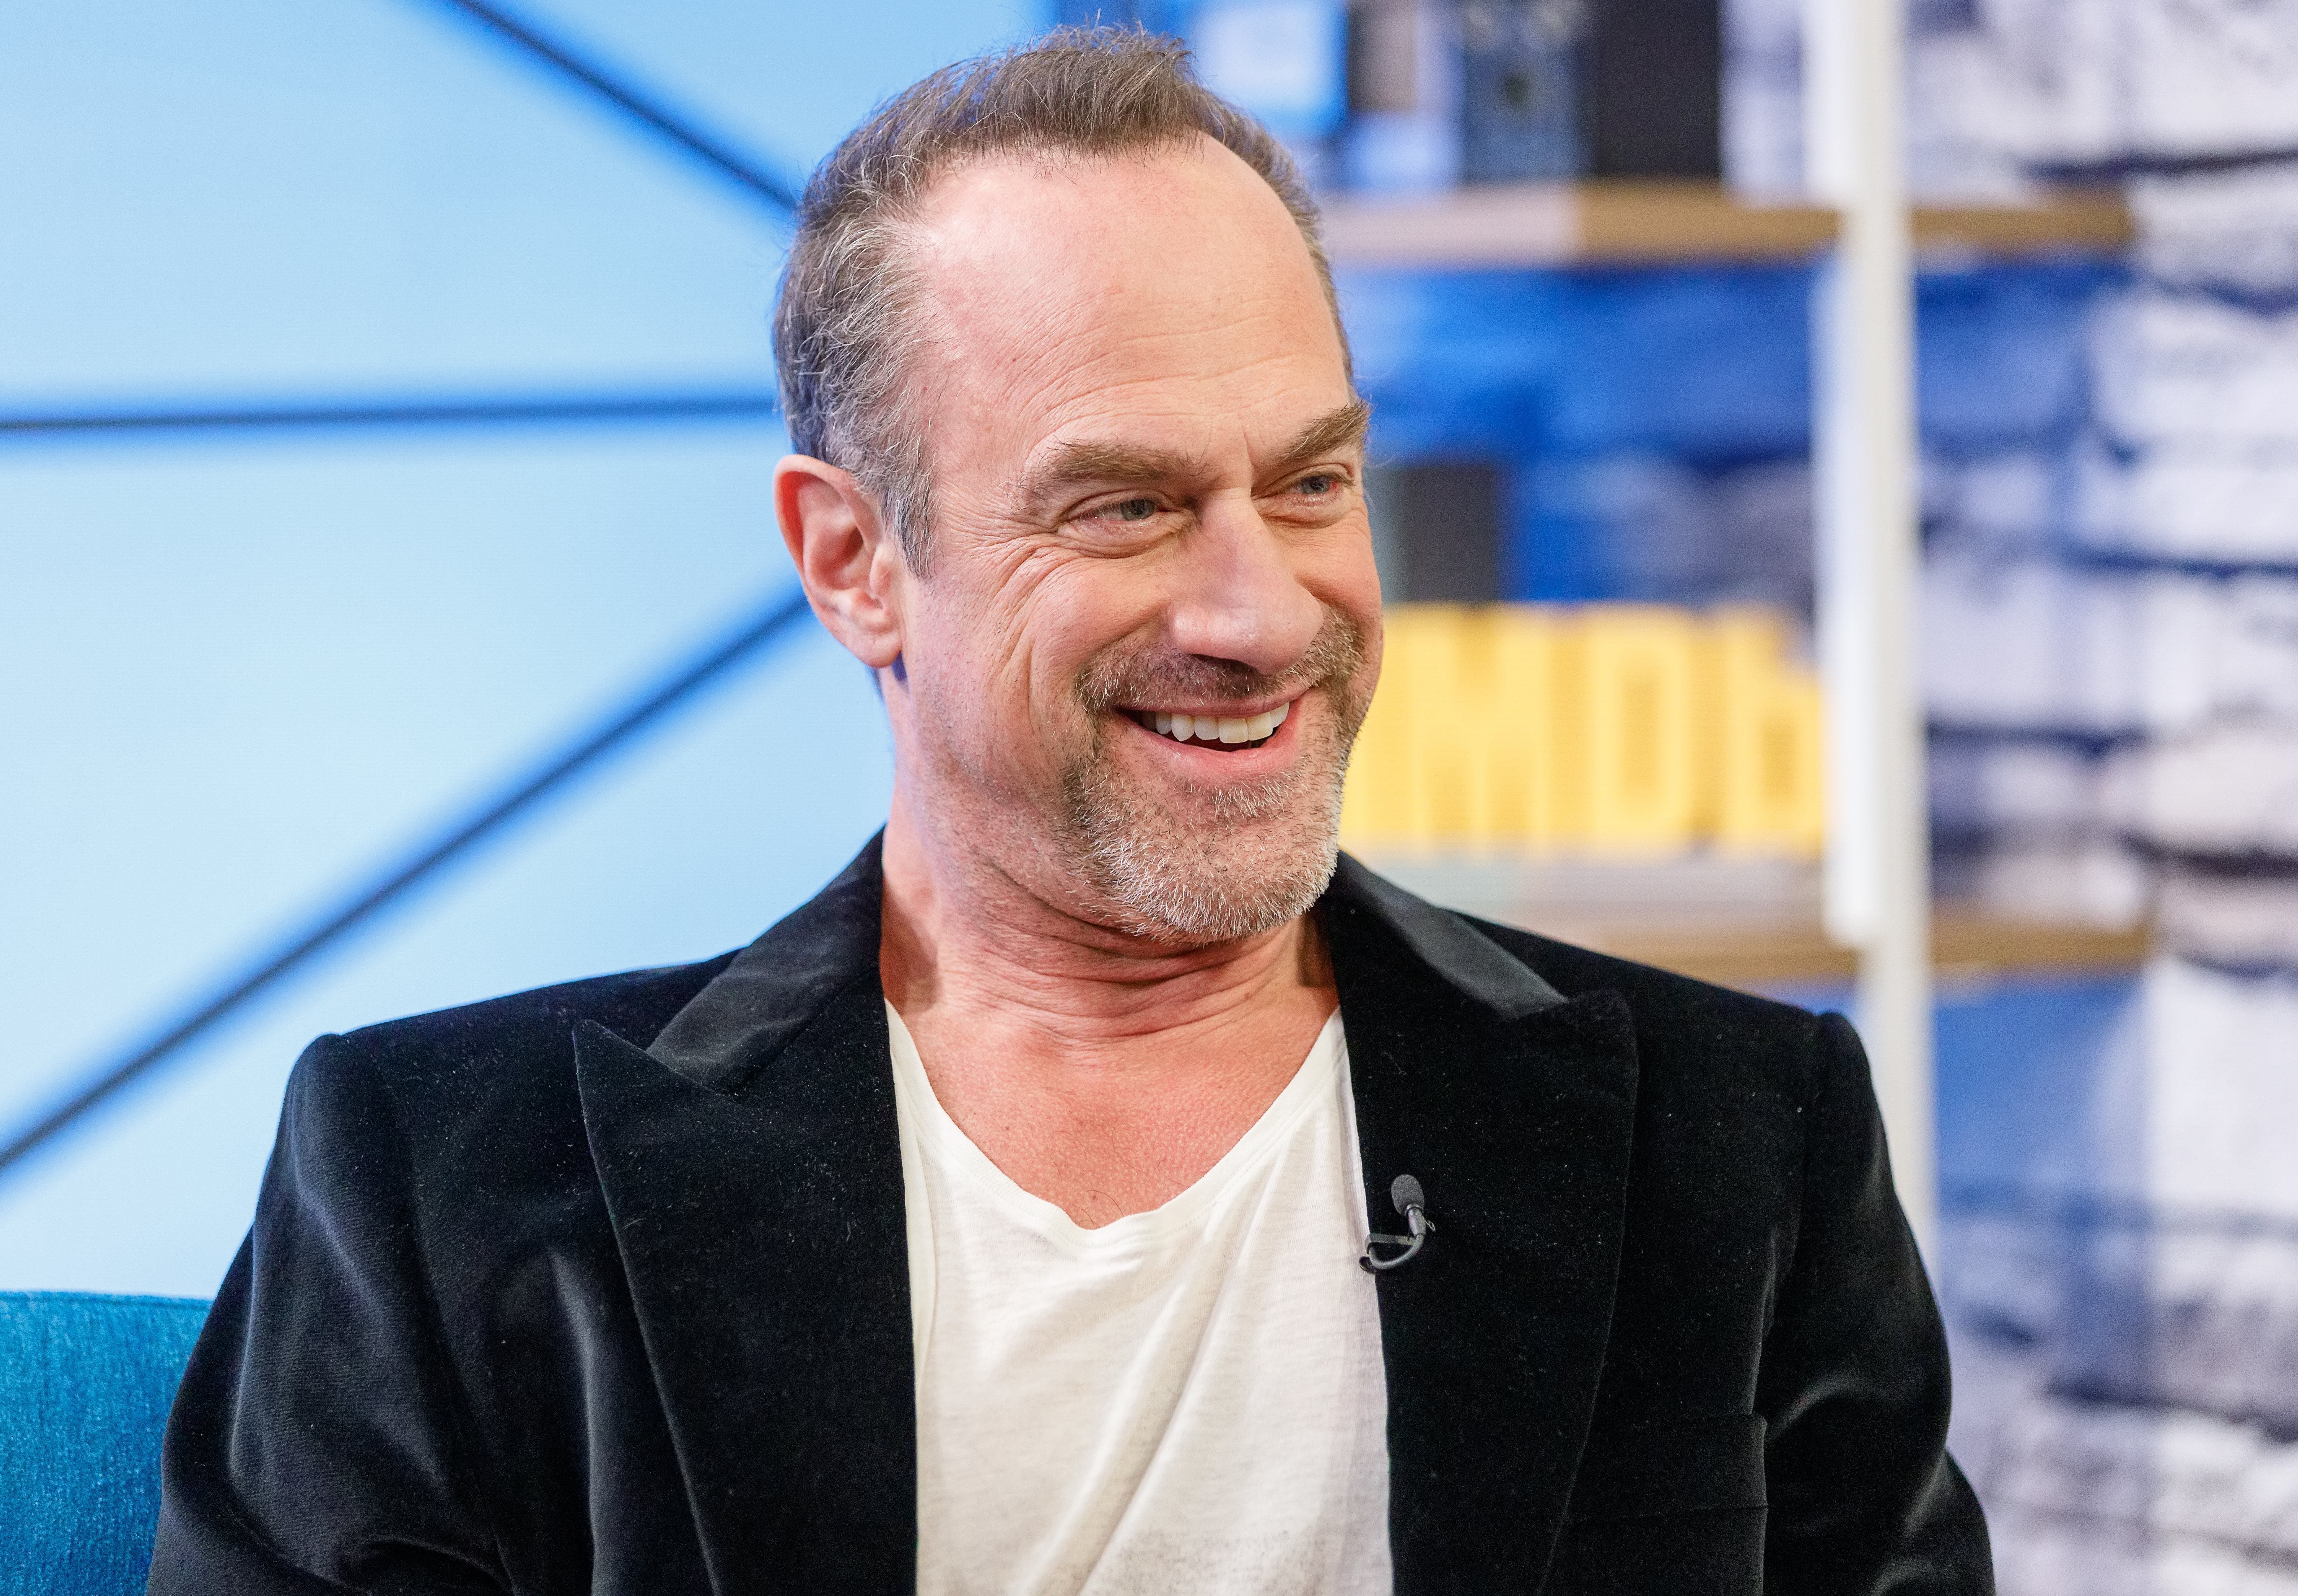 Christopher Meloni visits "The IMDb Show" in Studio City, California on March 26, 2019 | Photo: Getty Images